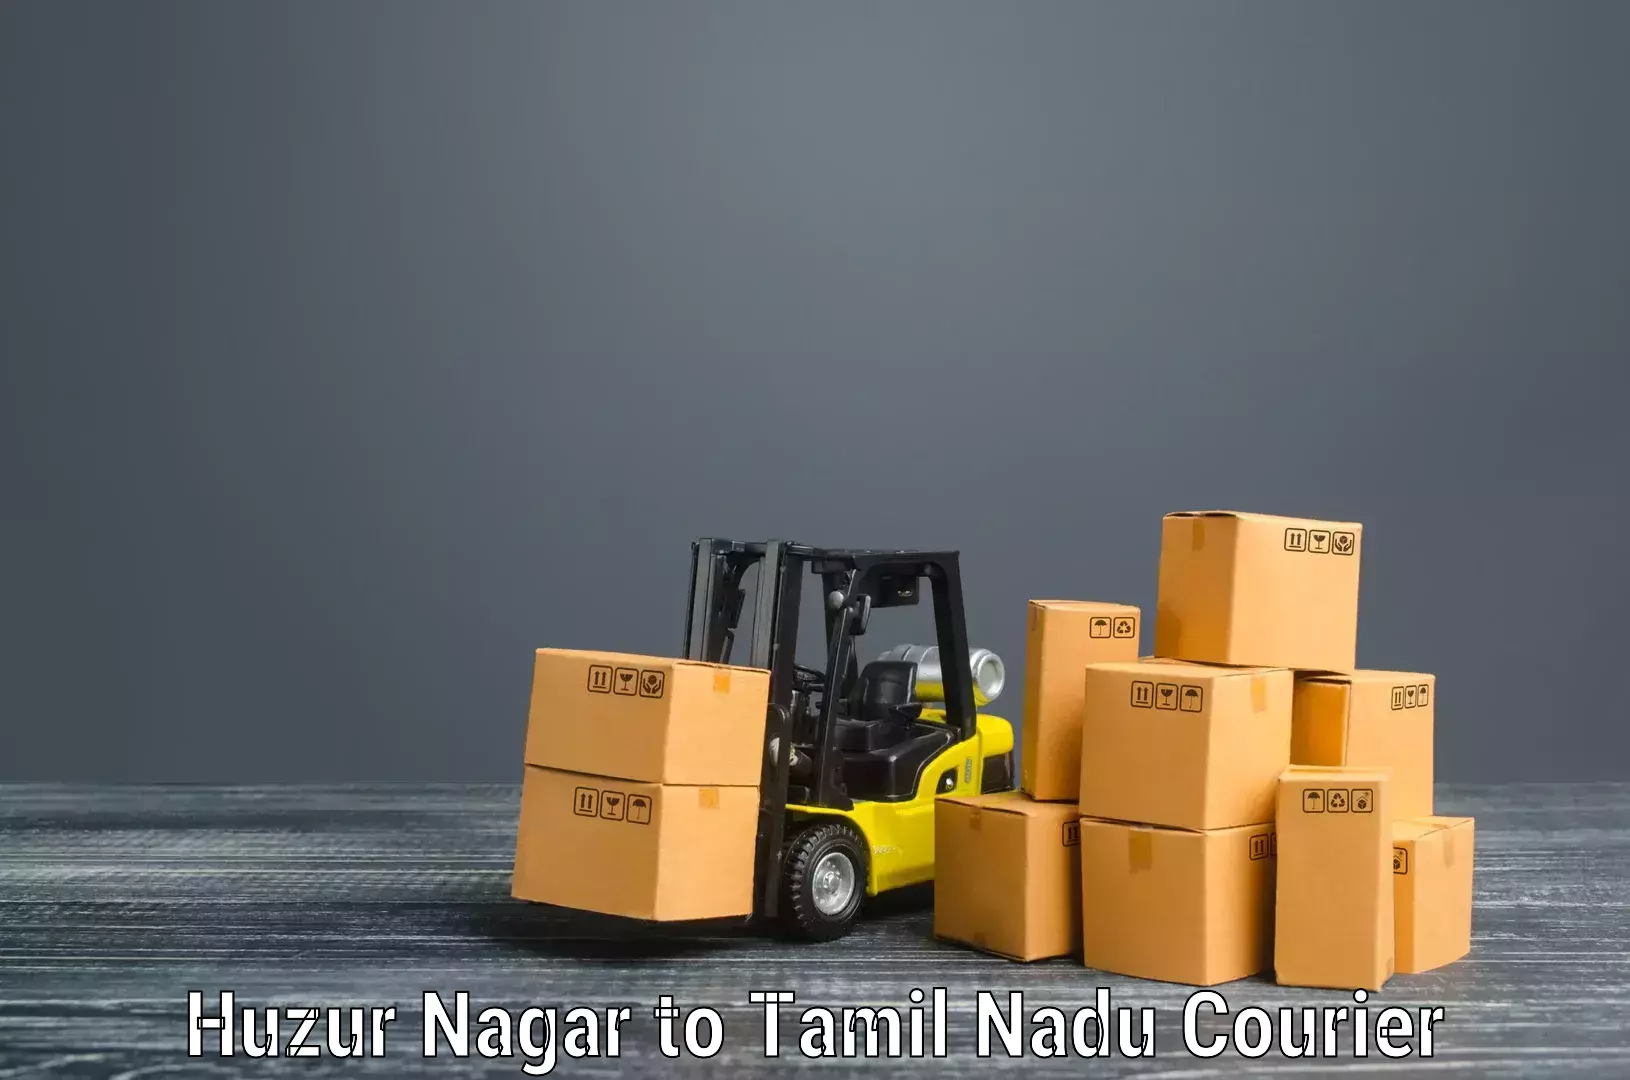 Professional movers and packers Huzur Nagar to Tamil Nadu